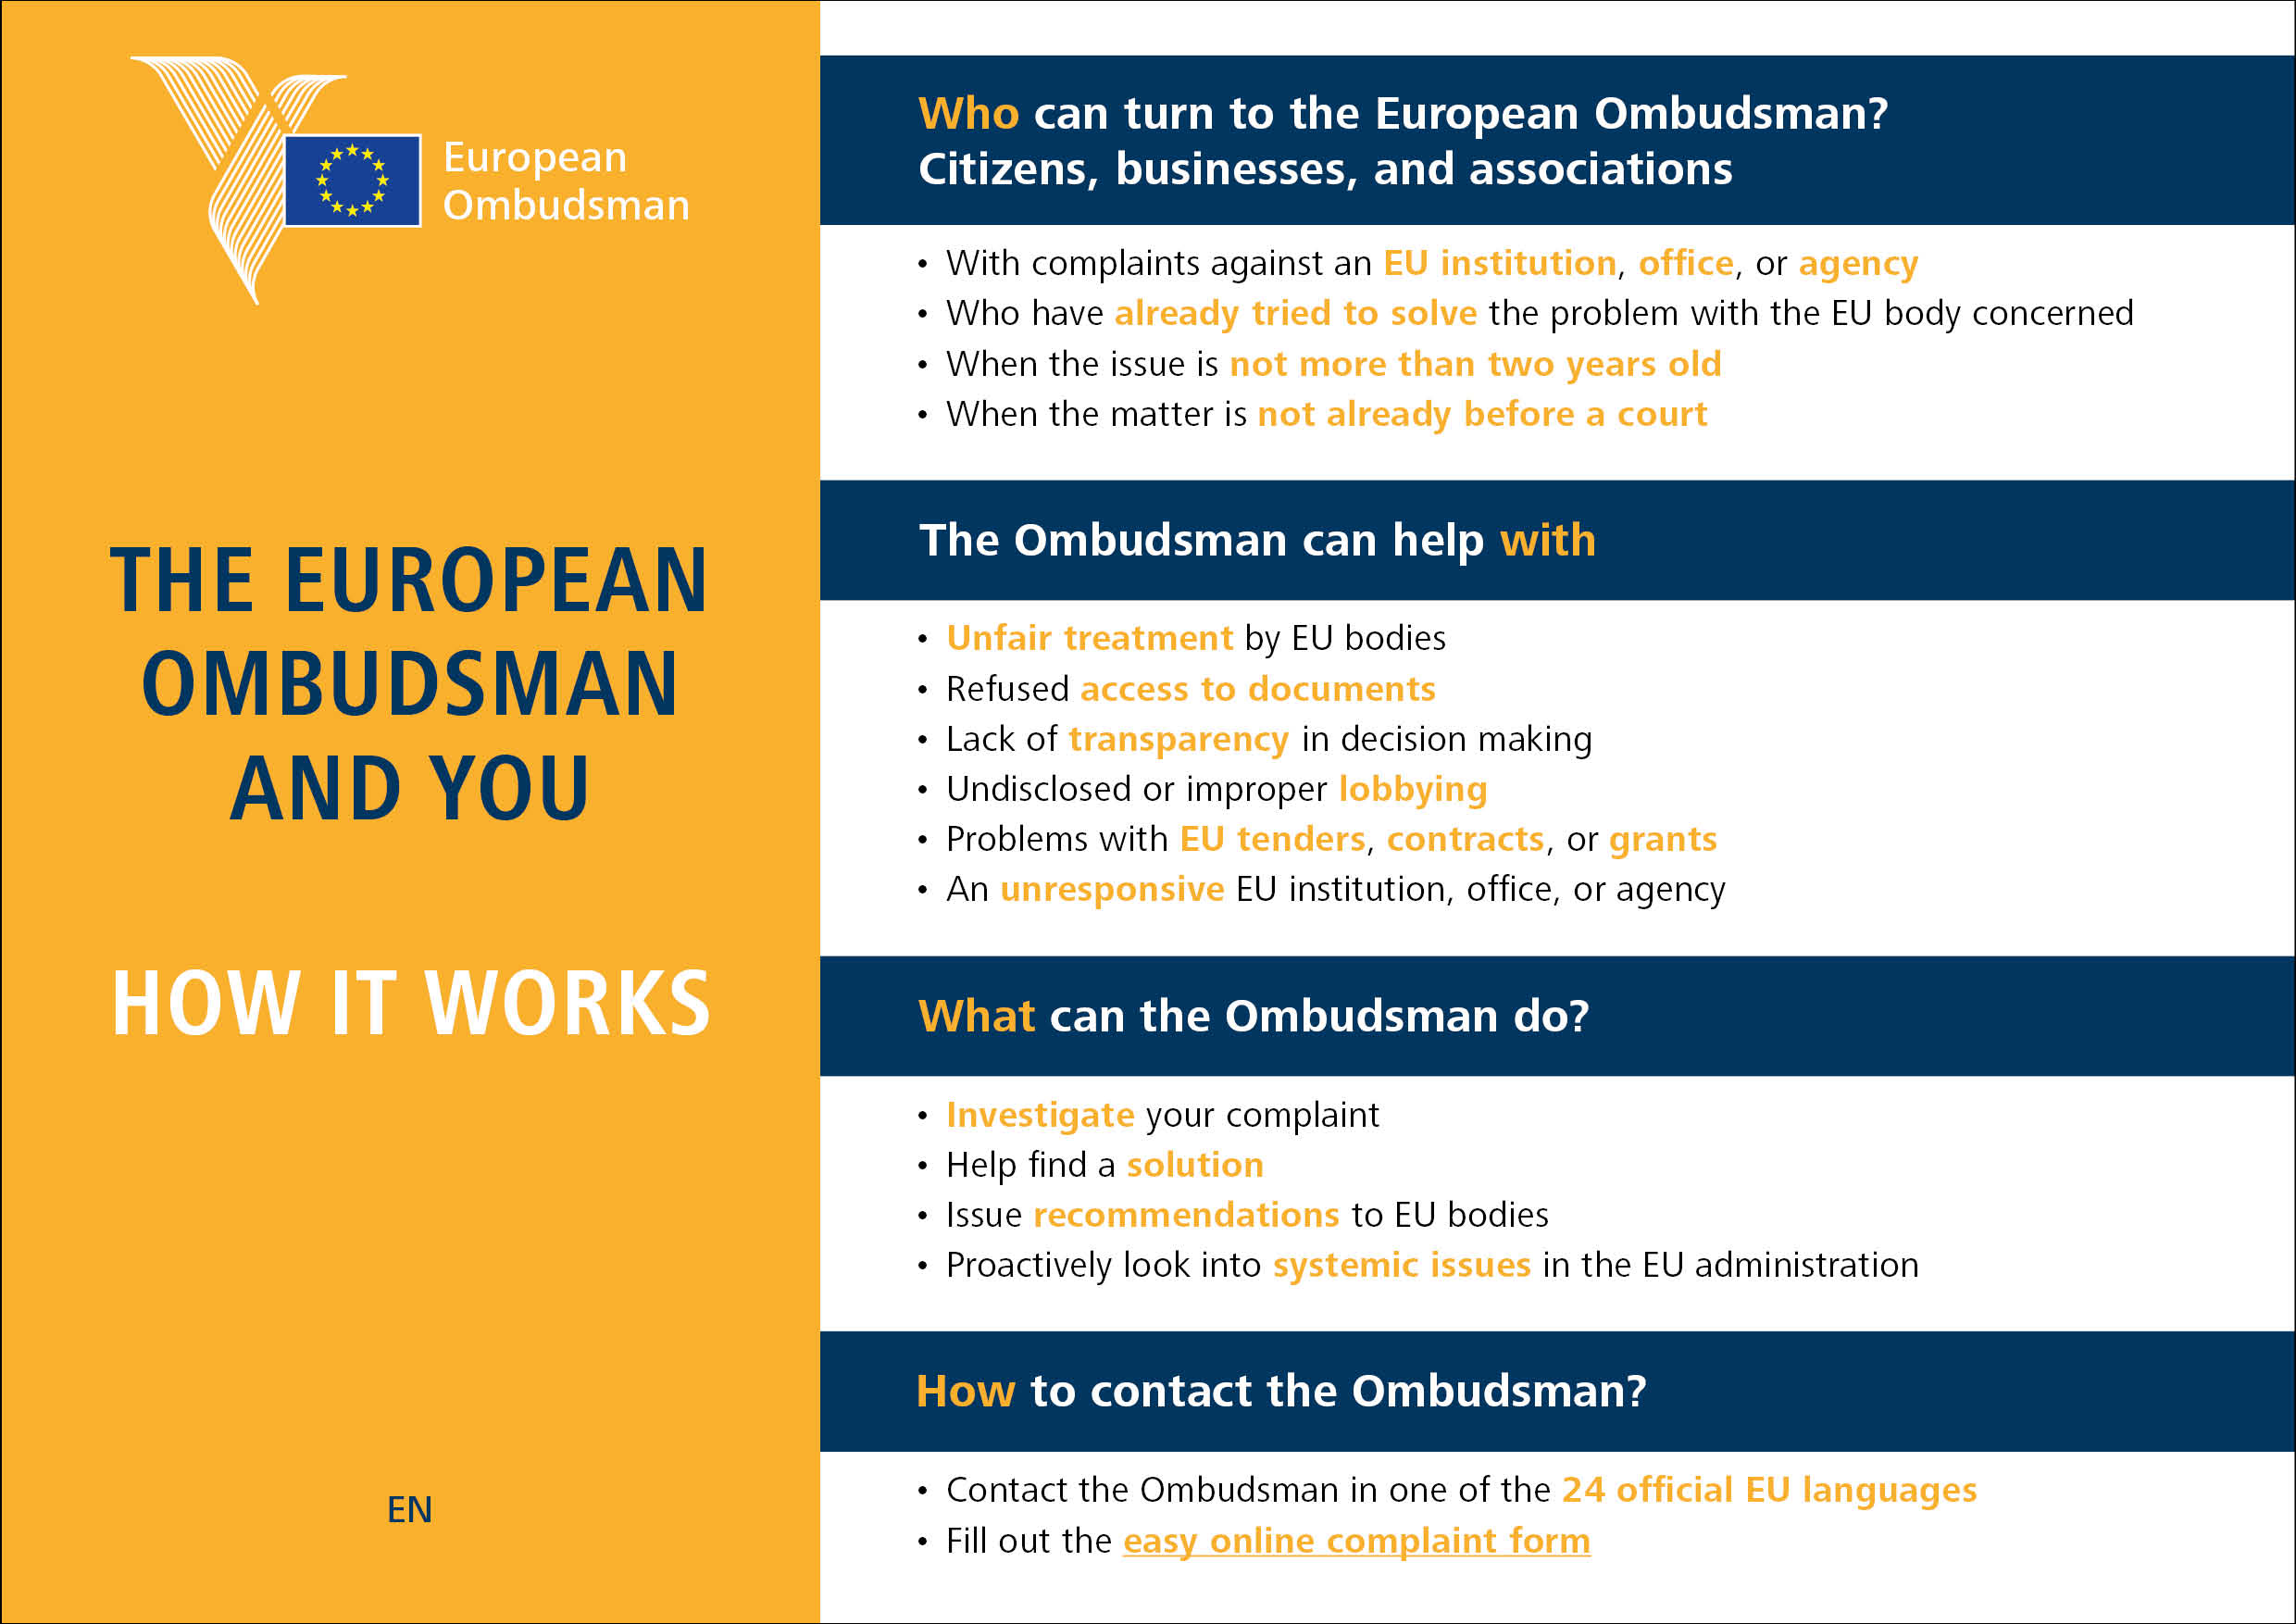 The European Ombudsman and you - How it works